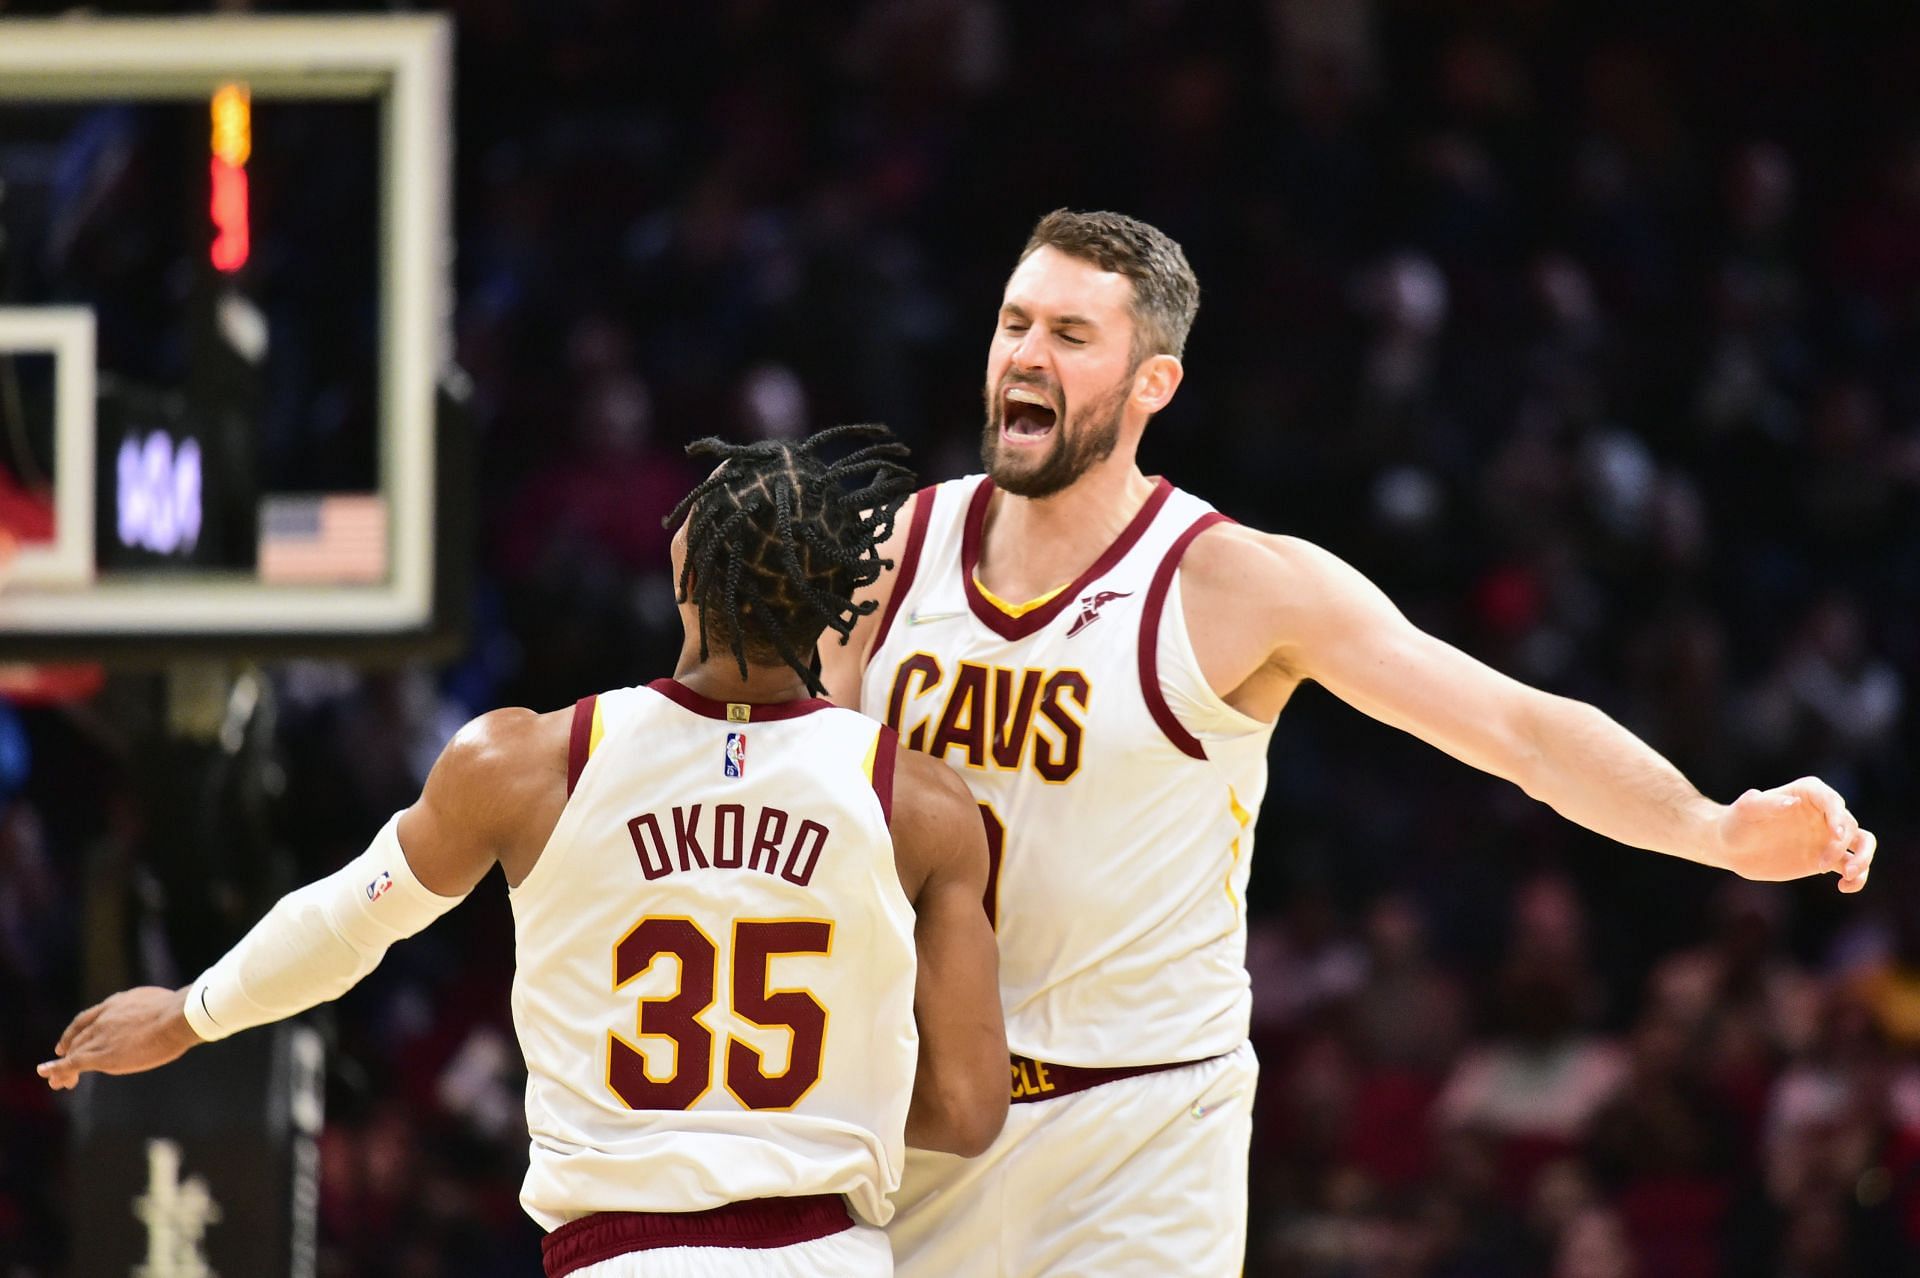 Isaac Okoro (#35) and Kevin Love of the Cleveland Cavaliers